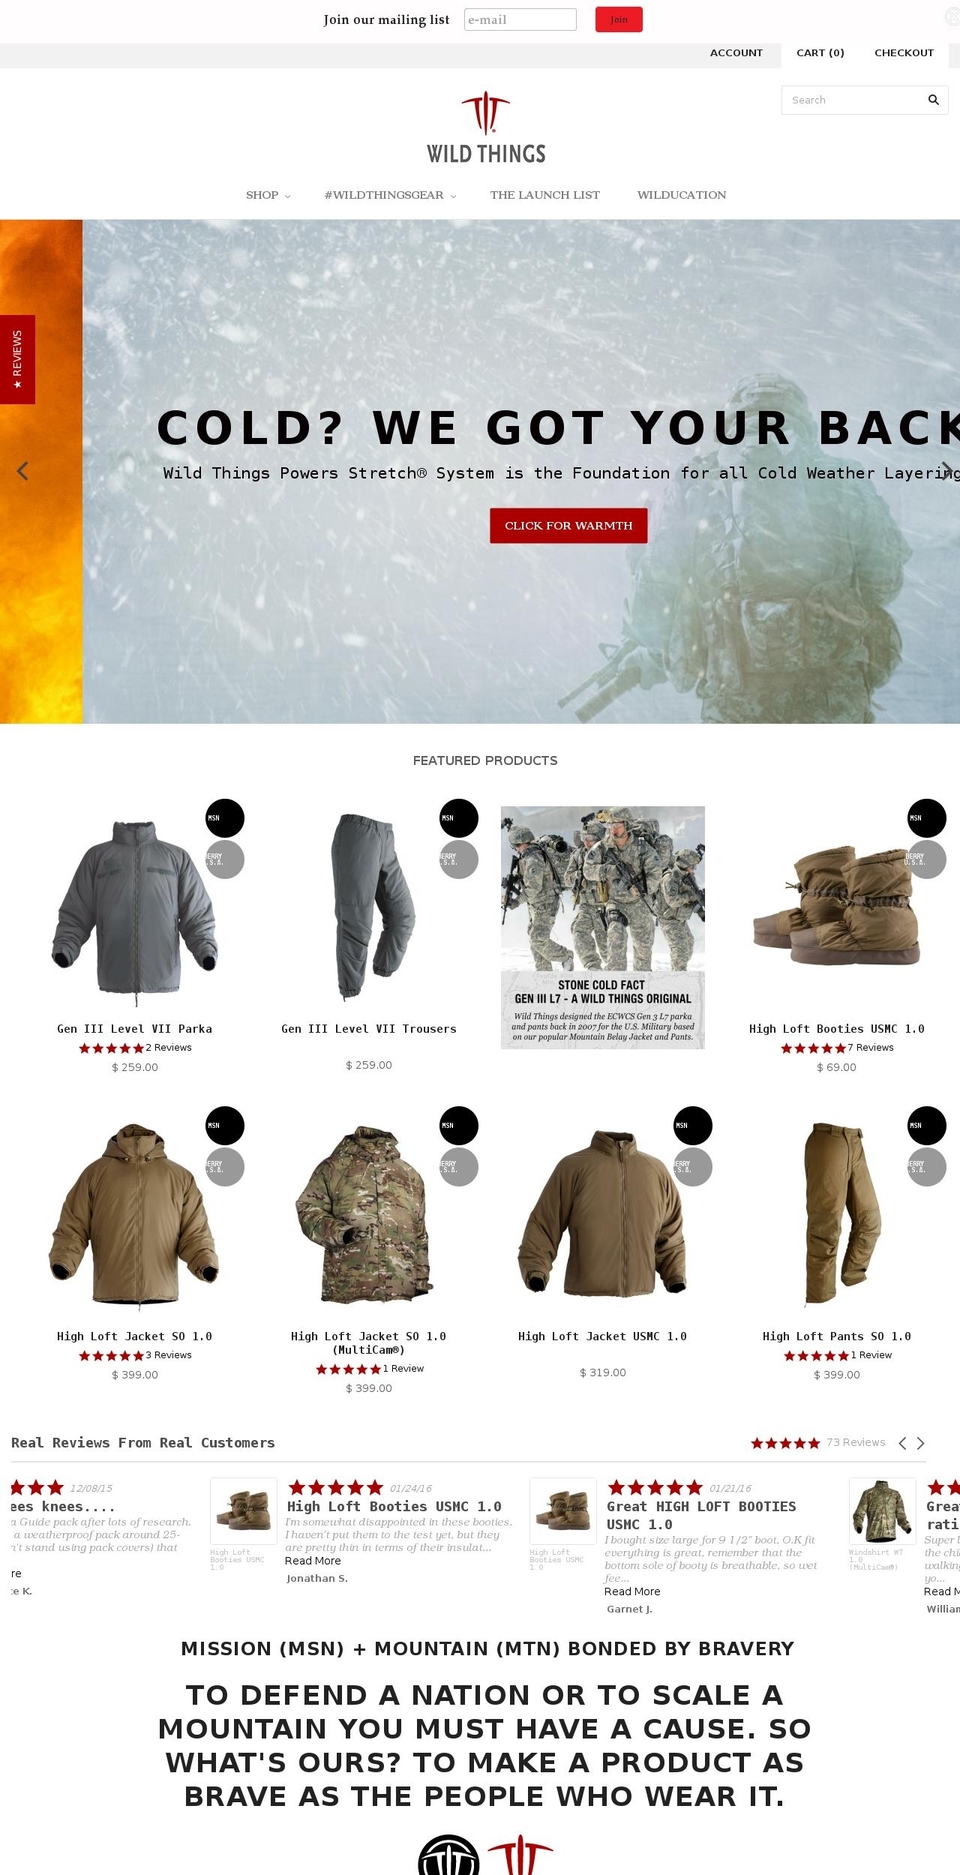 Prestige Shopify theme site example wildthingsgear.com